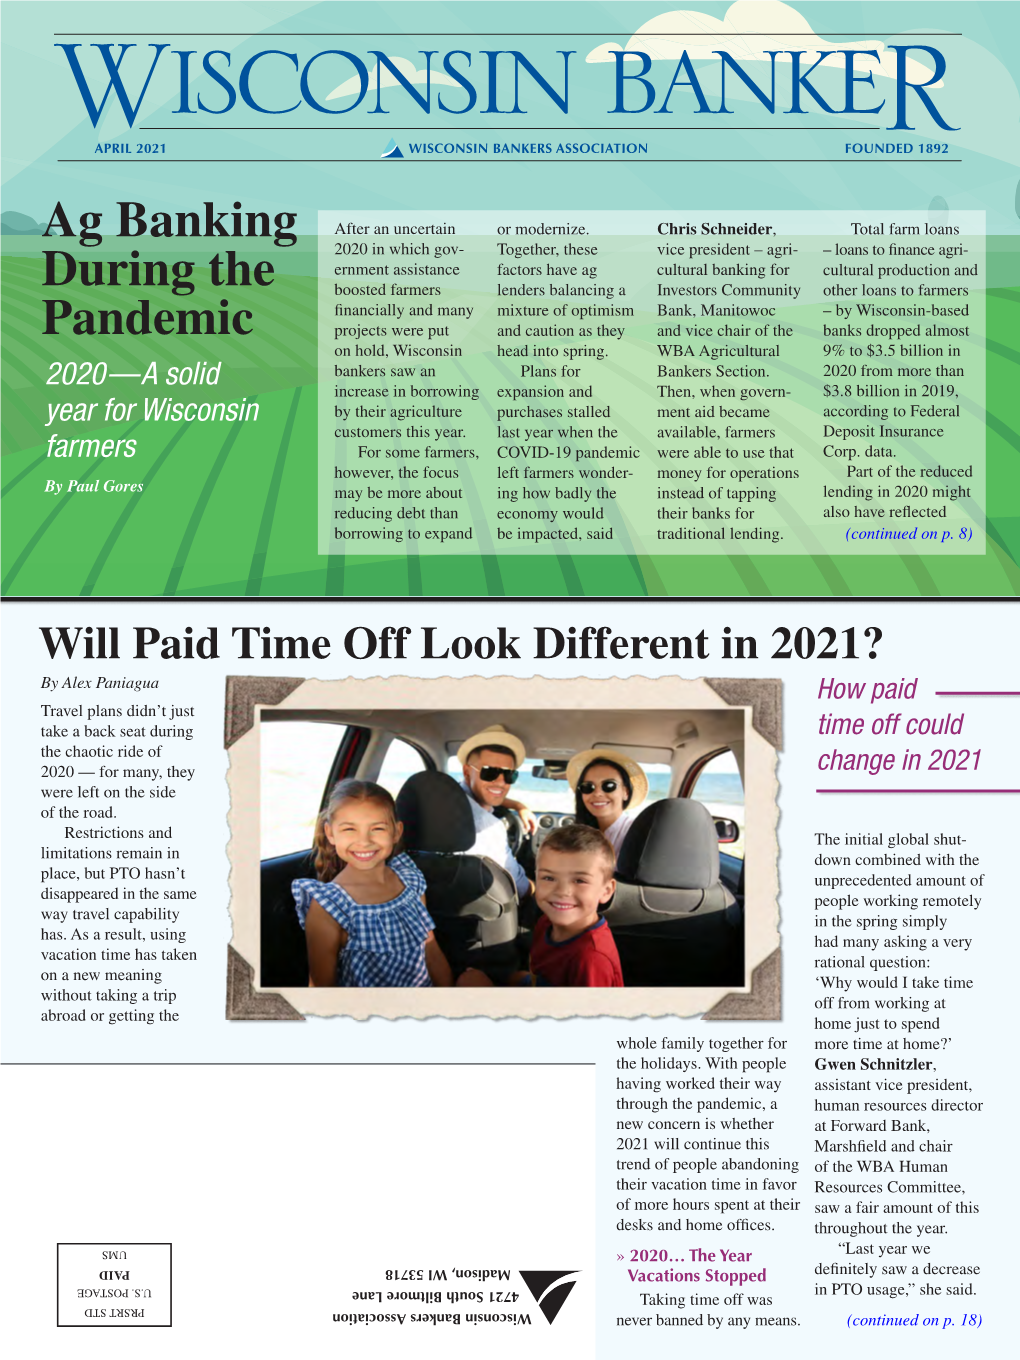 Ag Banking During the Pandemic